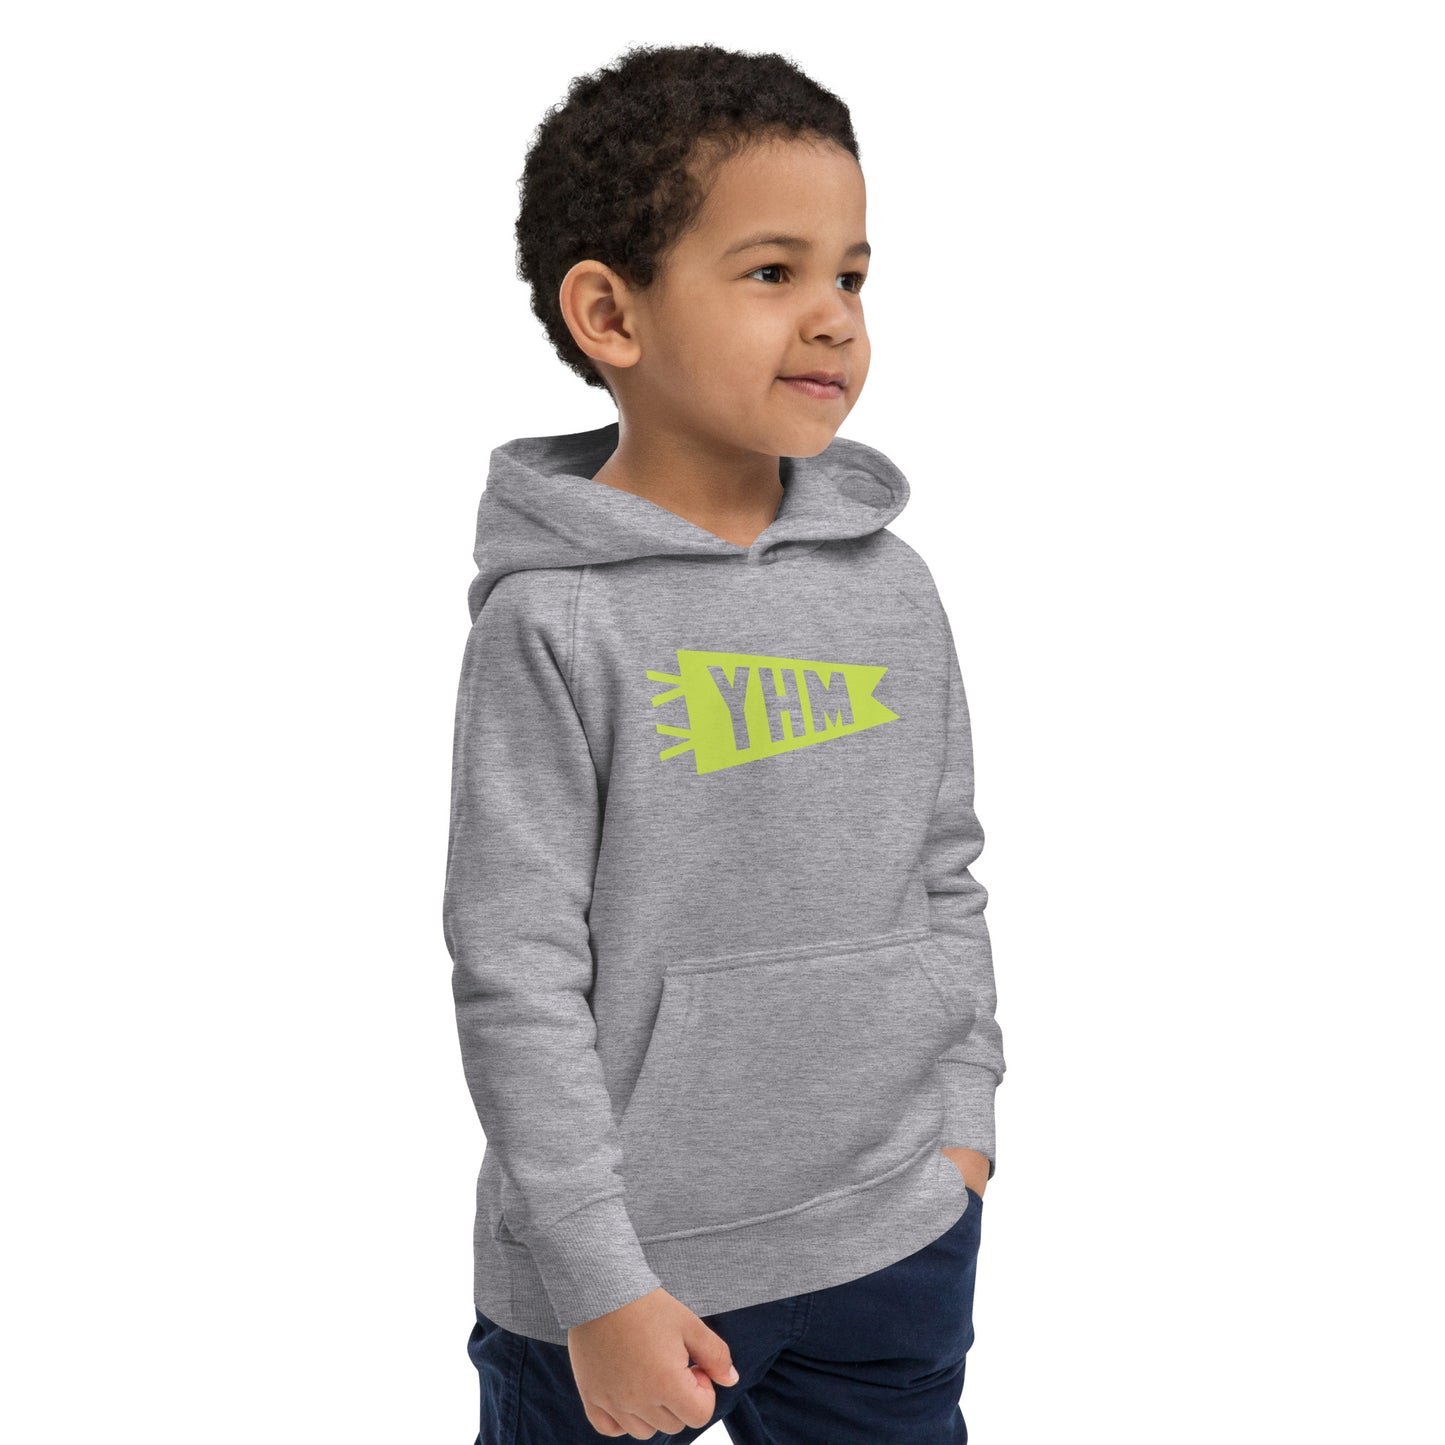 Kid's Sustainable Hoodie - Green Graphic • YHM Hamilton • YHM Designs - Image 13